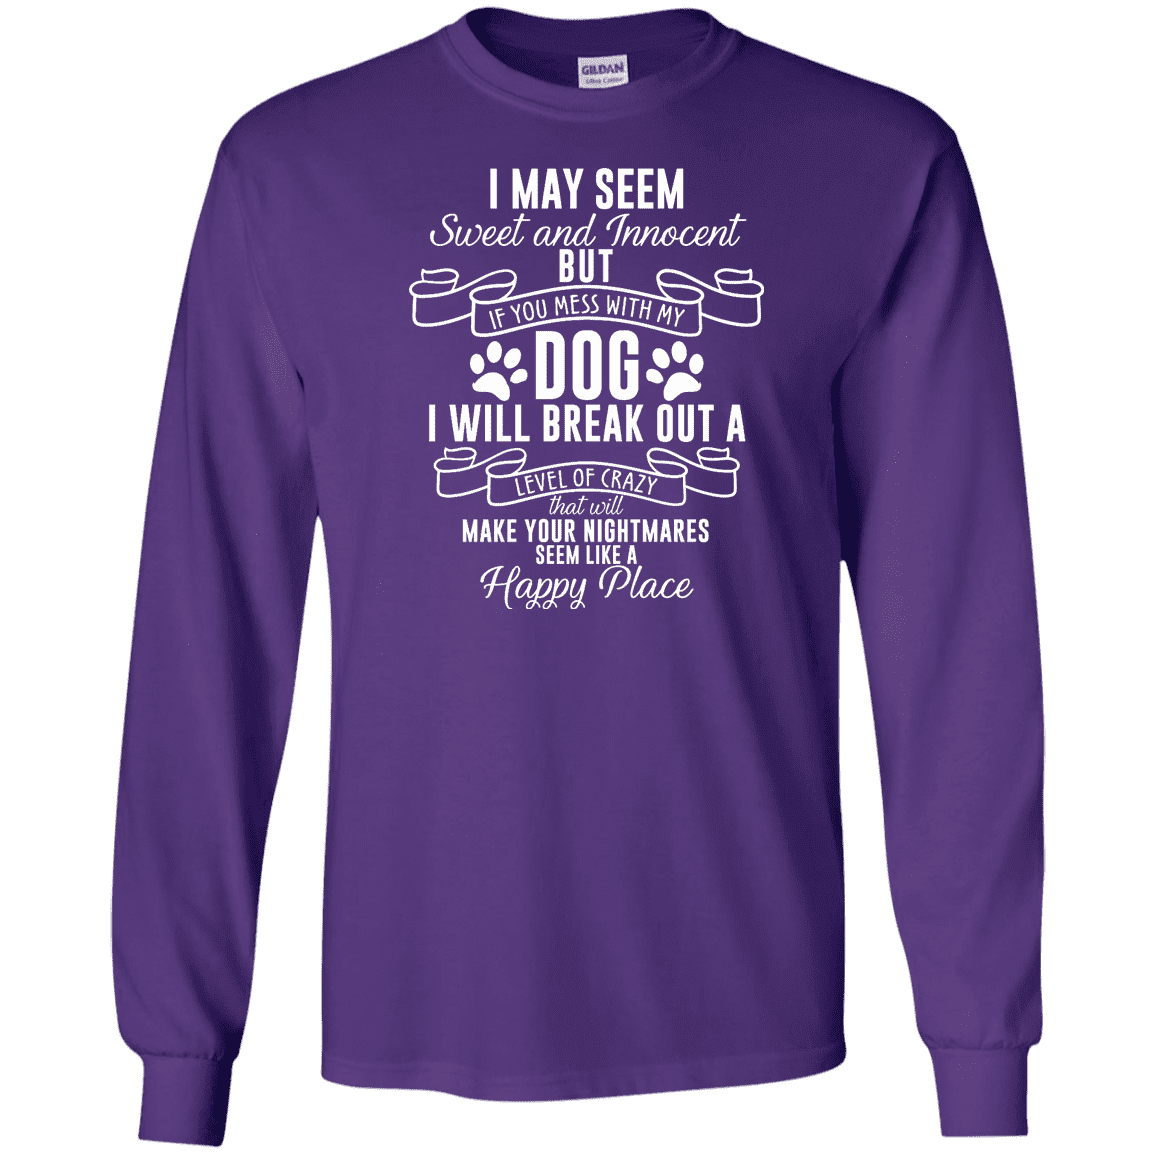 I May Seem Sweet And Innocent - Long Sleeve T Shirt – Rescuers Club